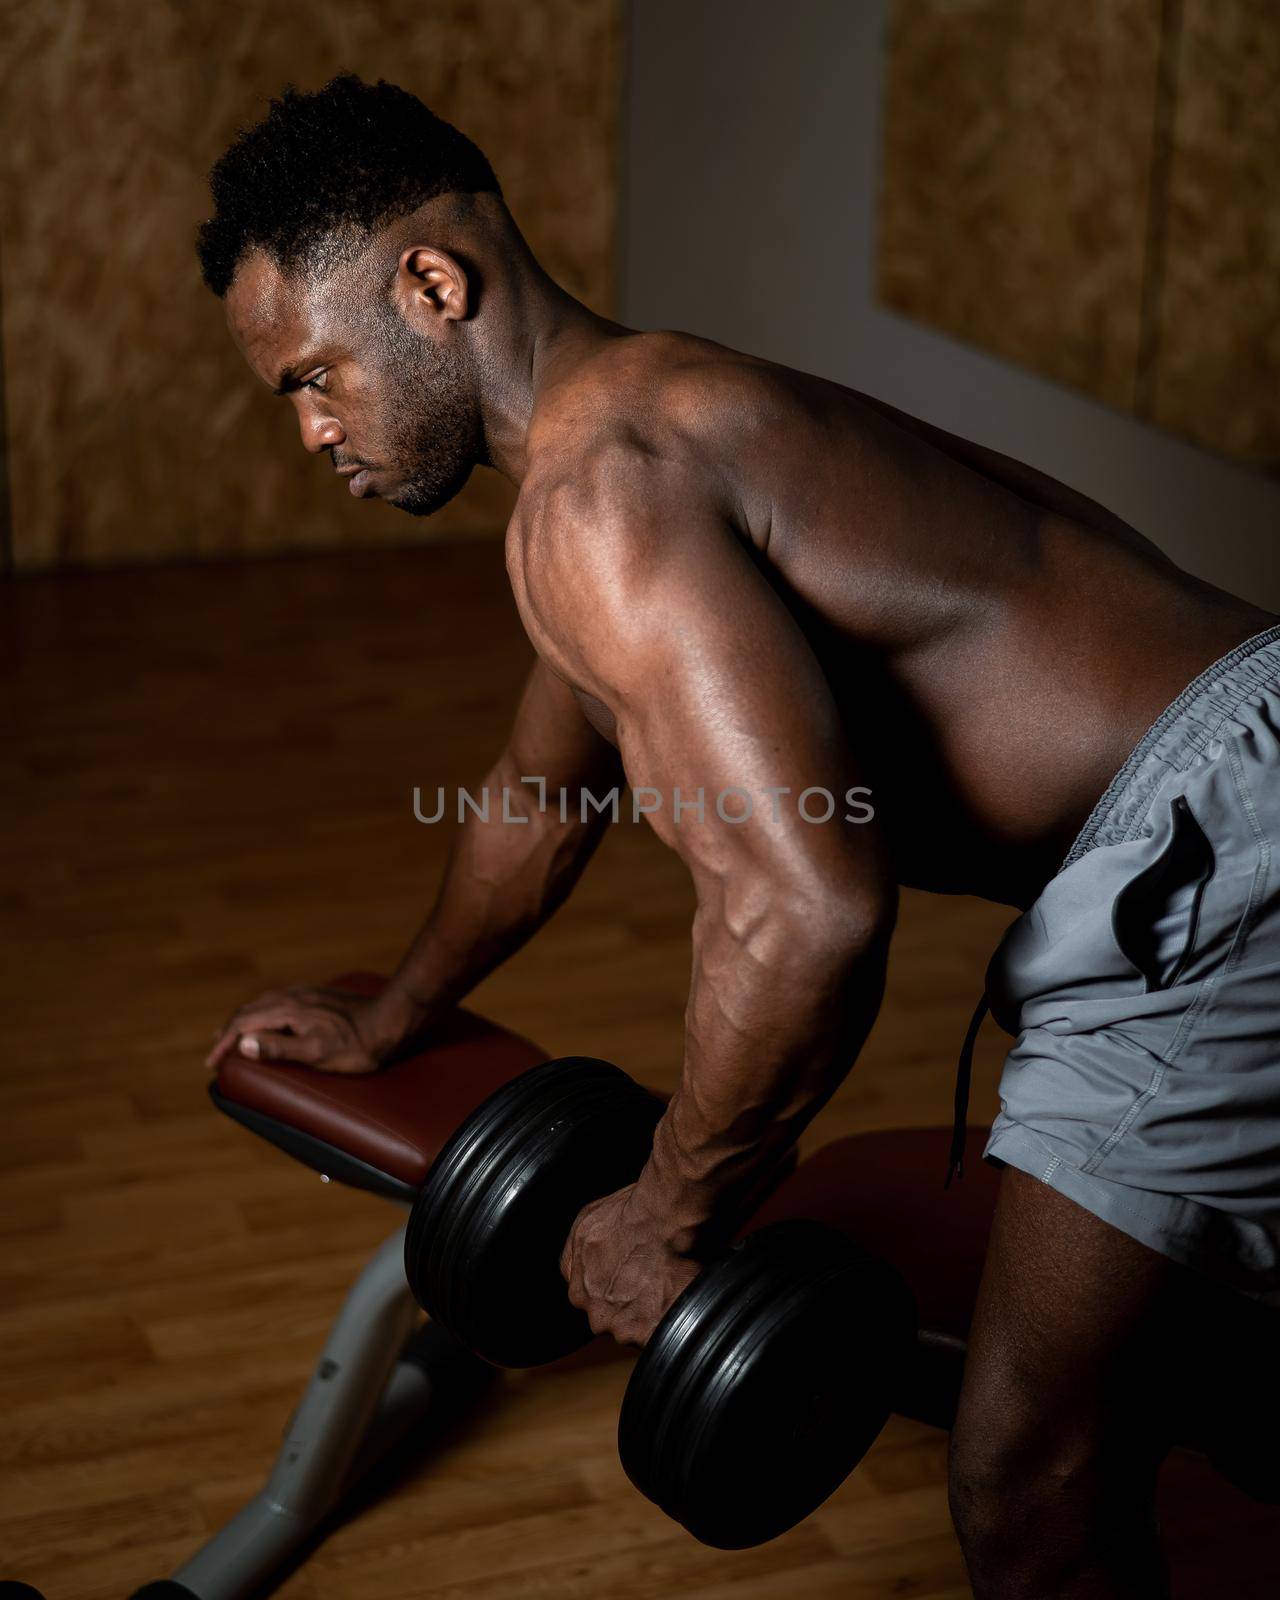 African american man with naked torso doing triceps row with dumbbell on bench. by mrwed54